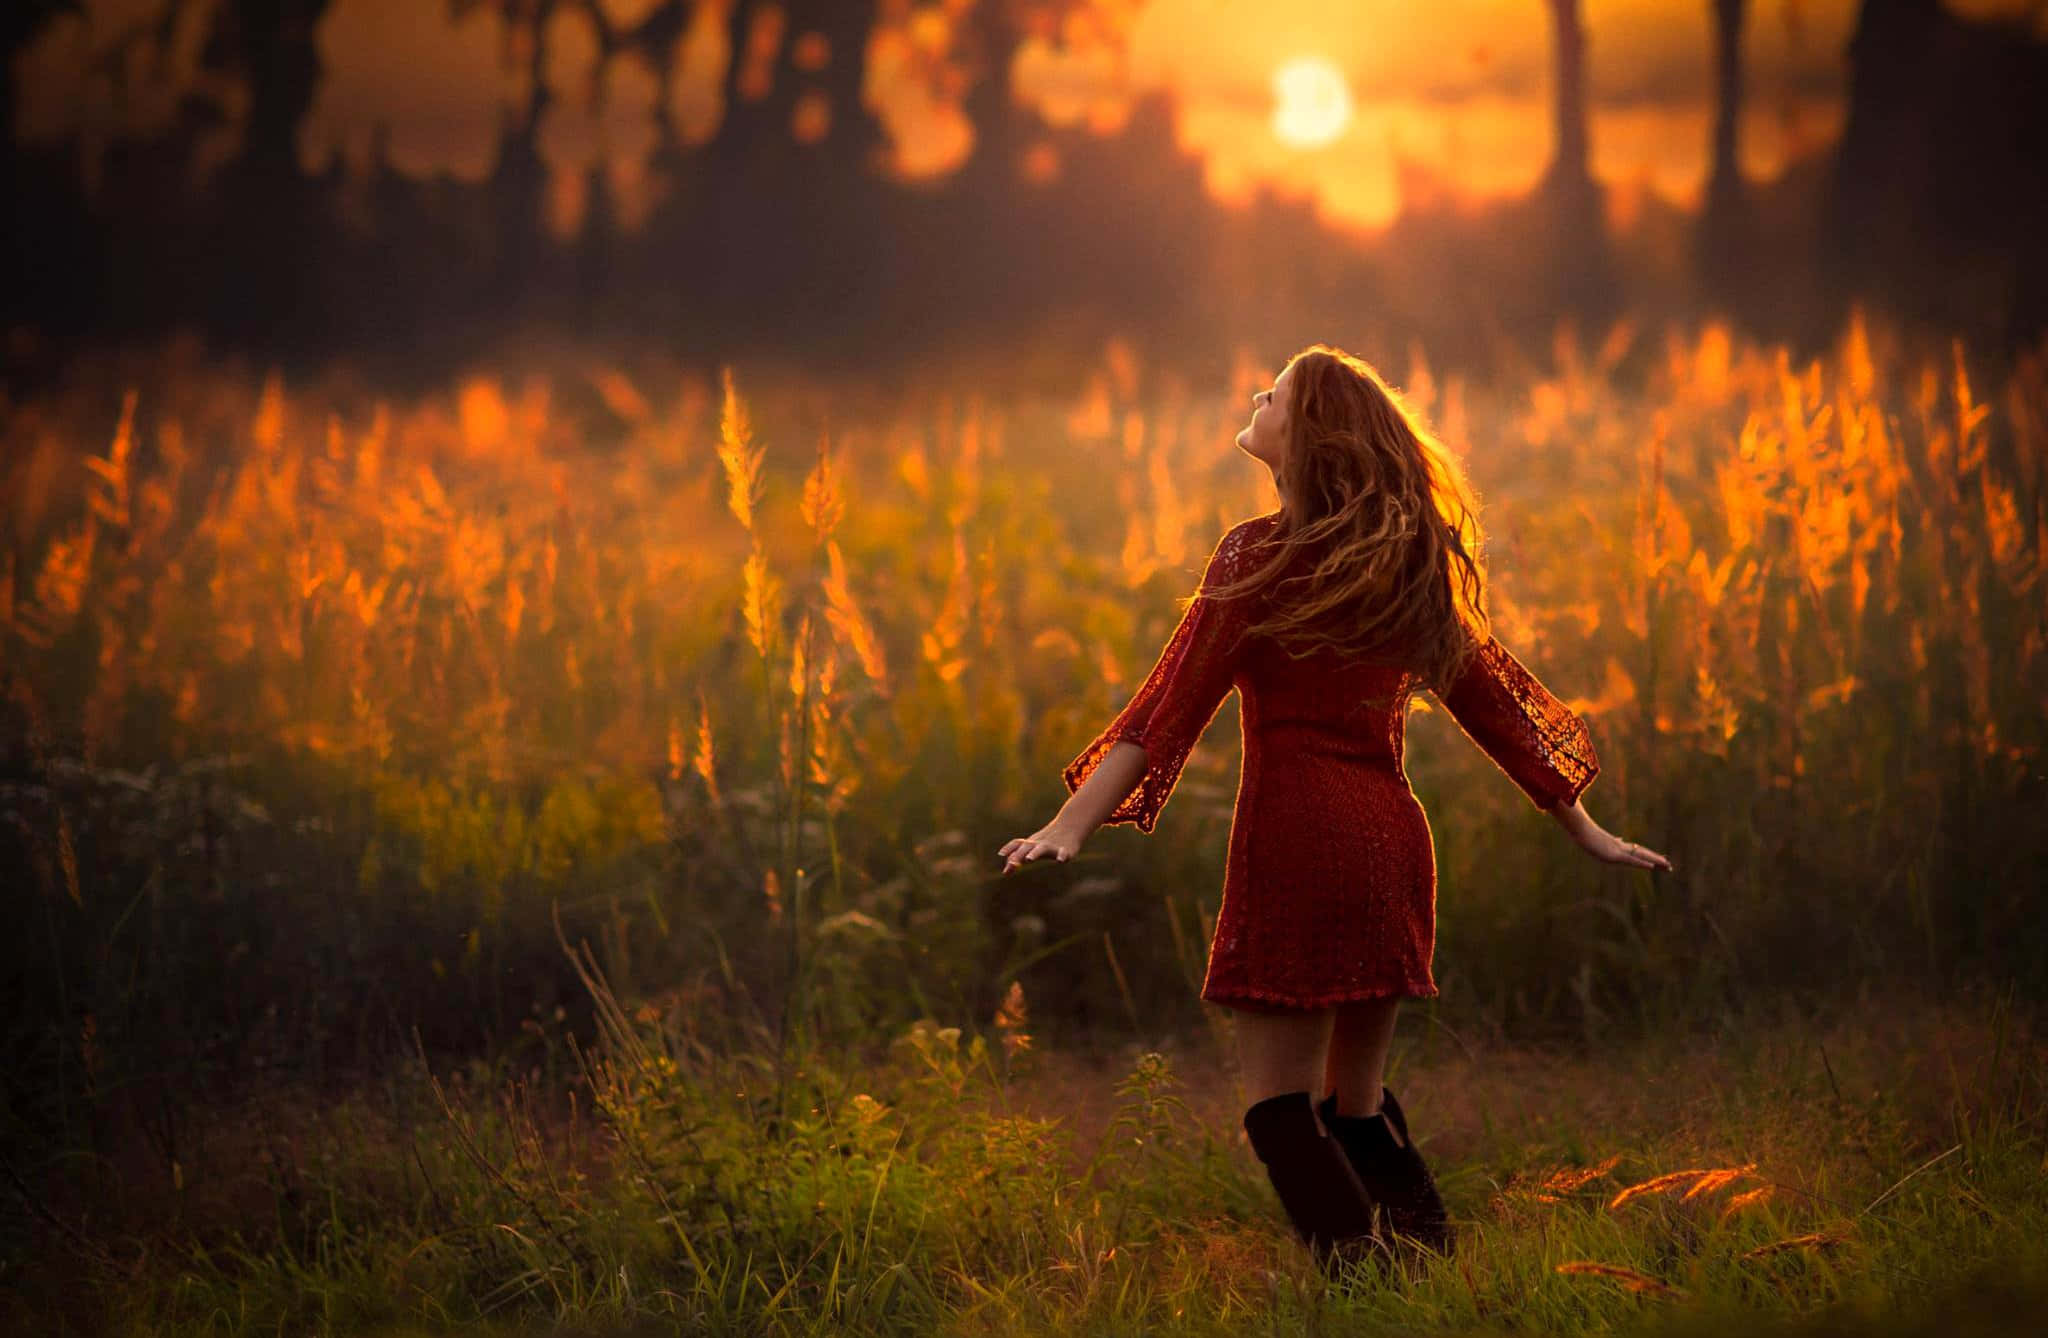 A Woman In Red Standing In A Field At Sunset